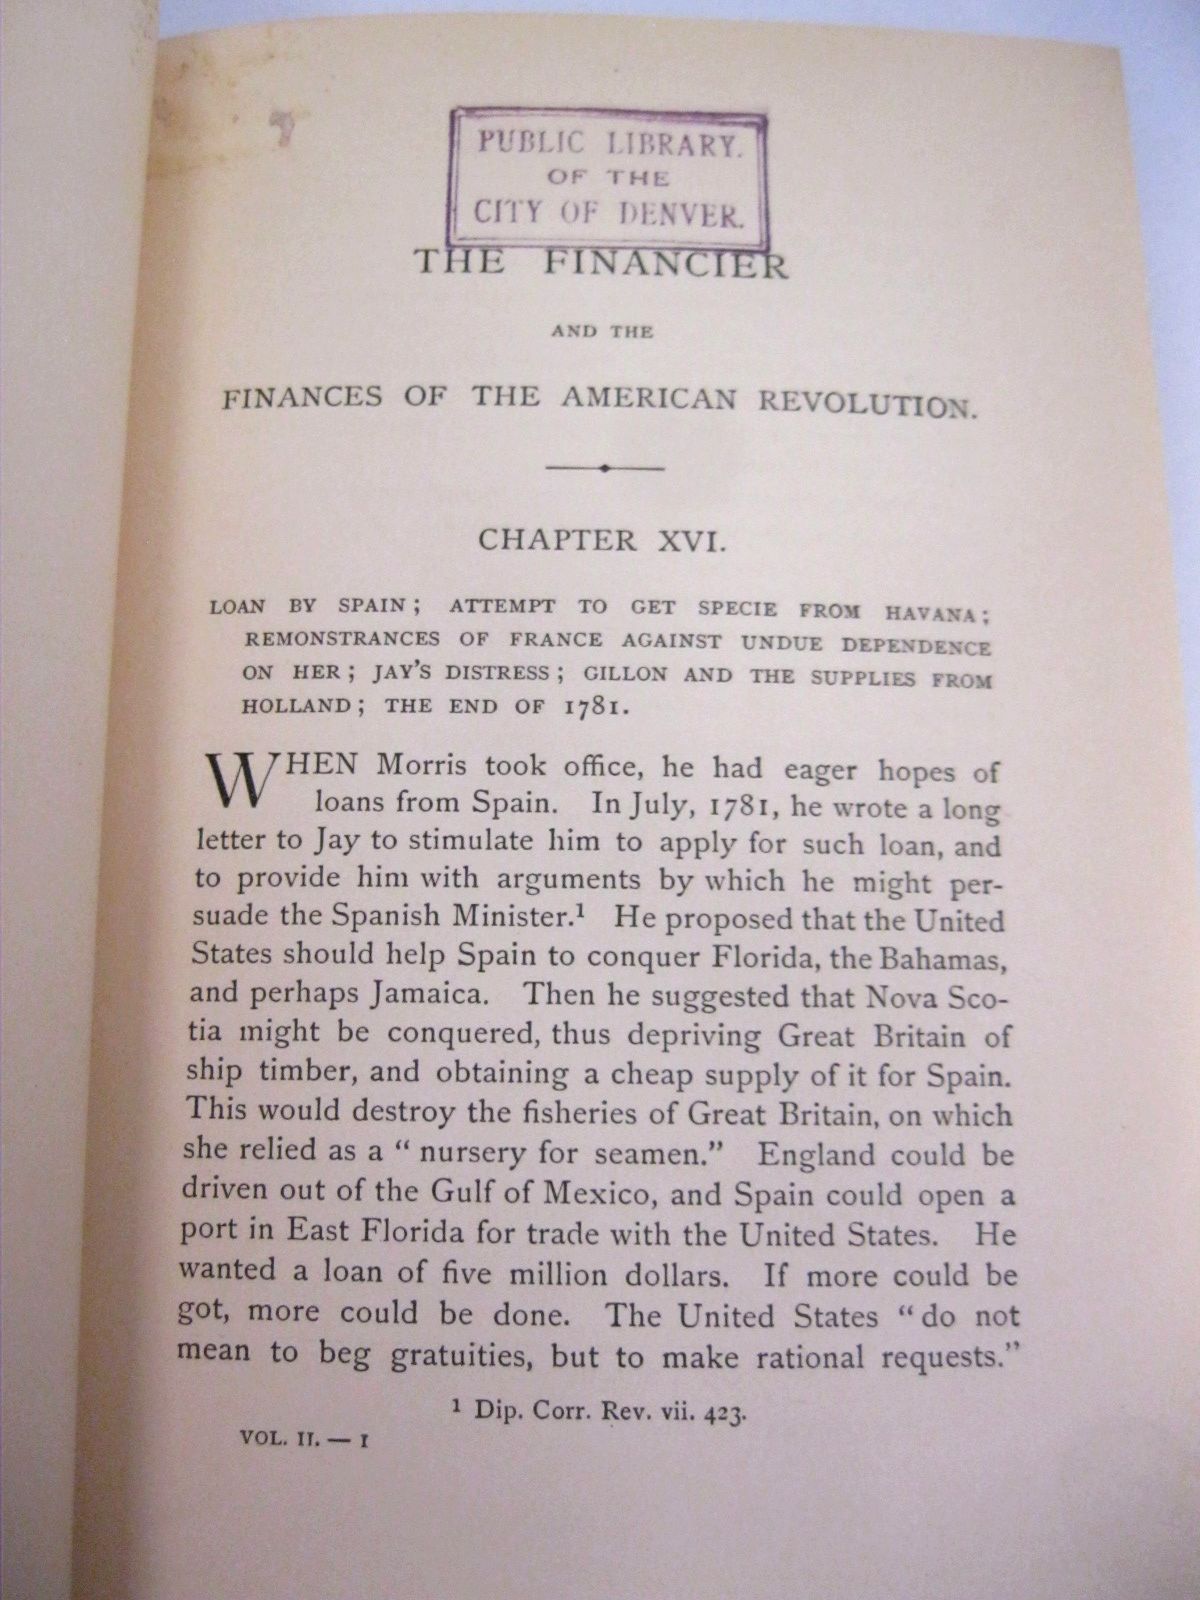 The Financier and the Finances of the American Revolution by William Graham Sumner